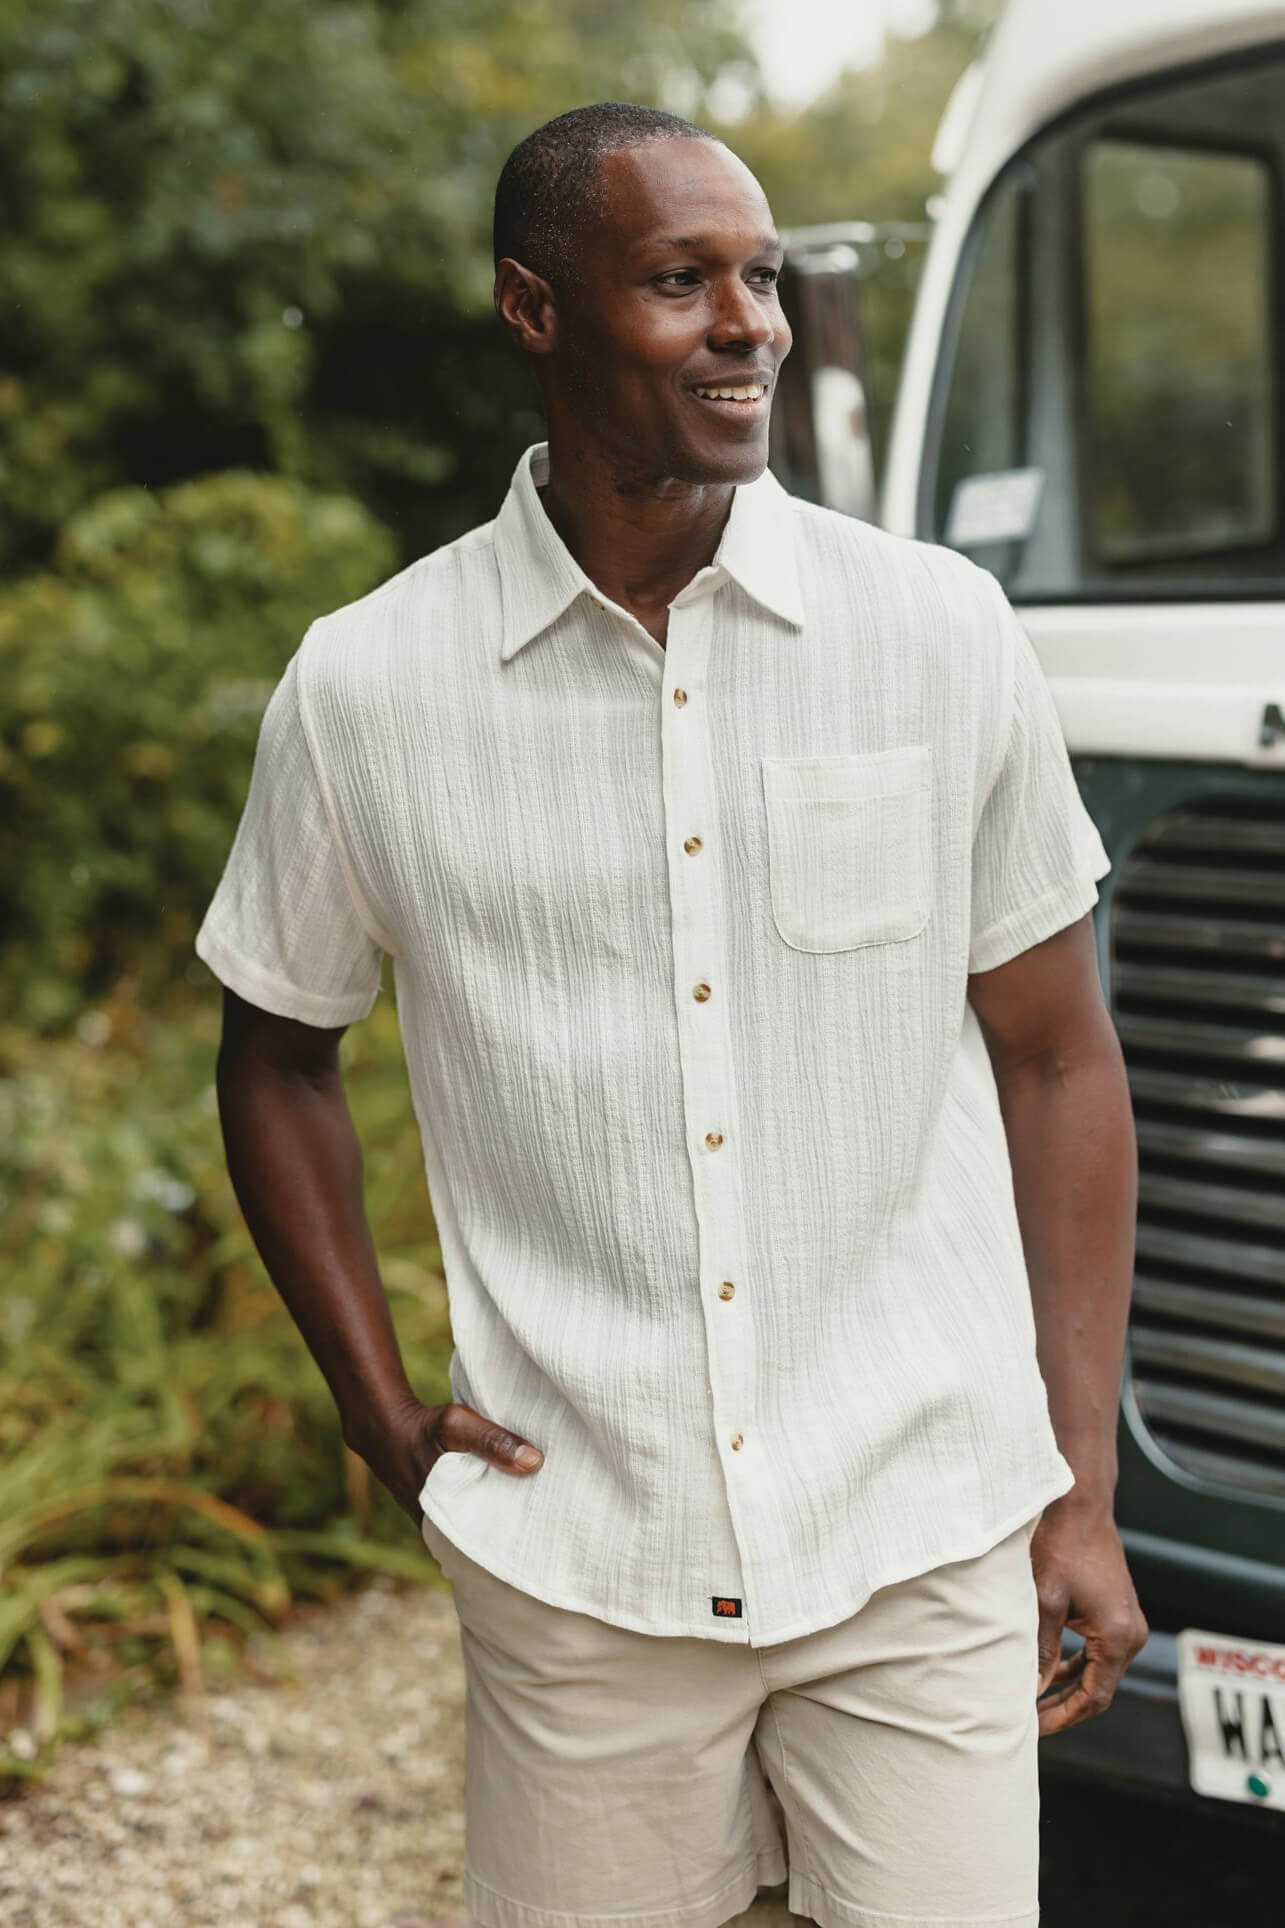 The Normal Brand Freshwater button up shirt in ivory crinkle